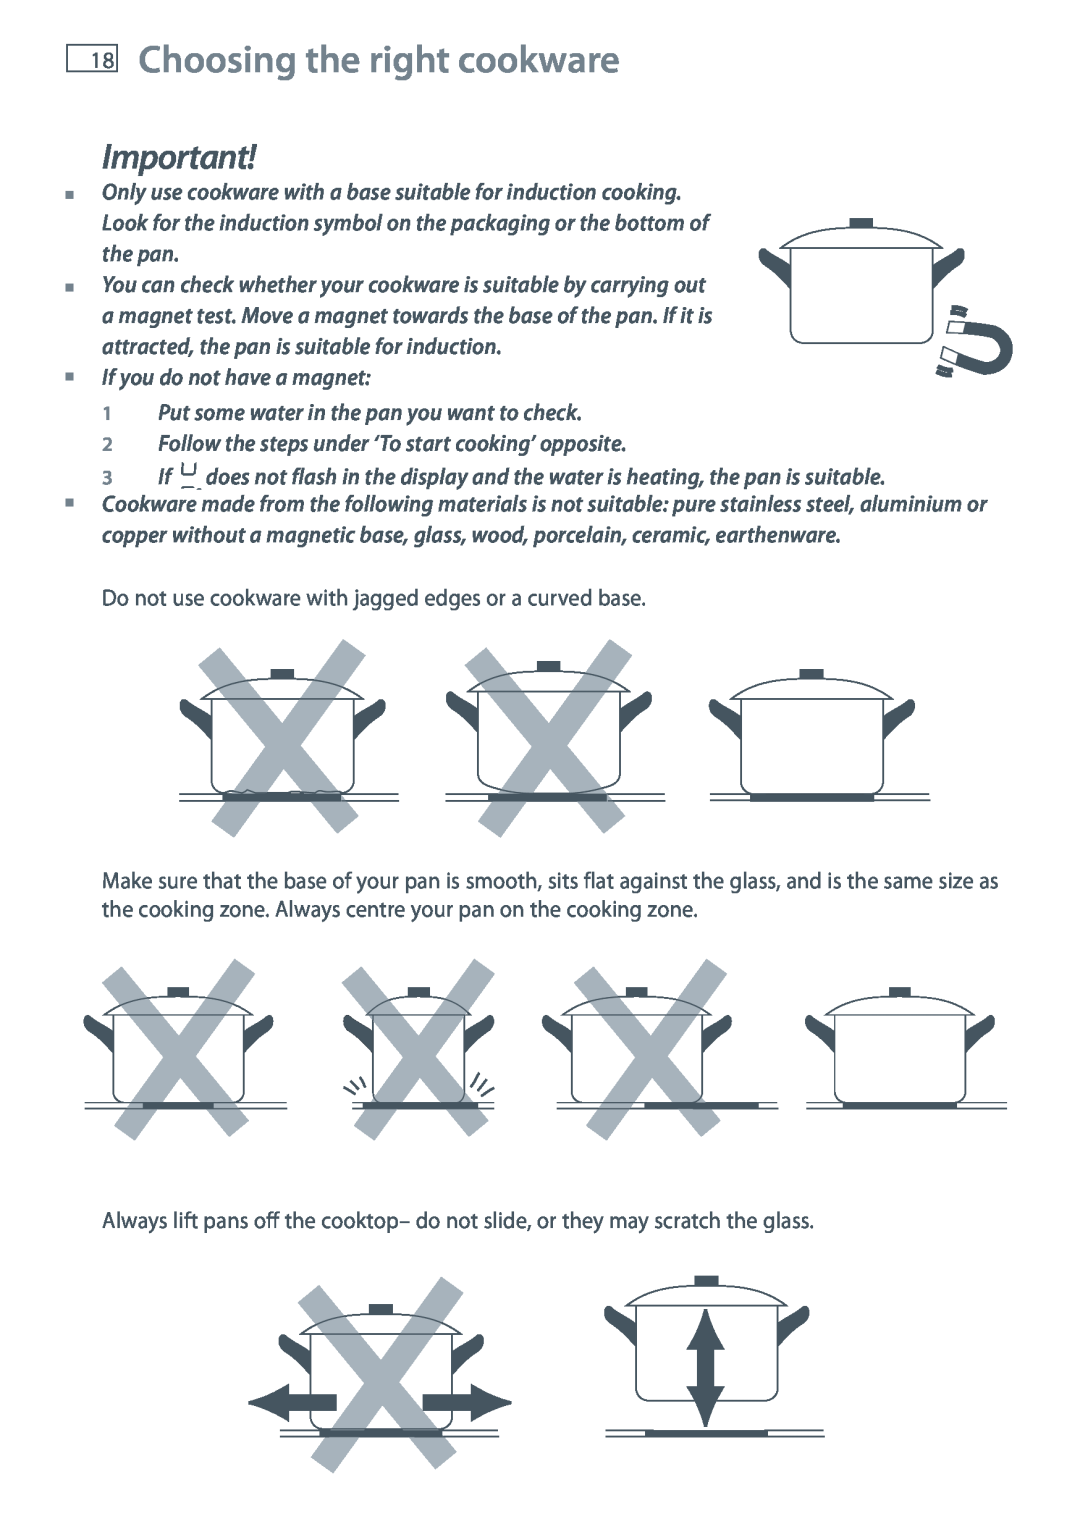 Fisher & Paykel CI604DT, CI754DT, CI905DT installation instructions Choosing the right cookware, If you do not have a magnet 